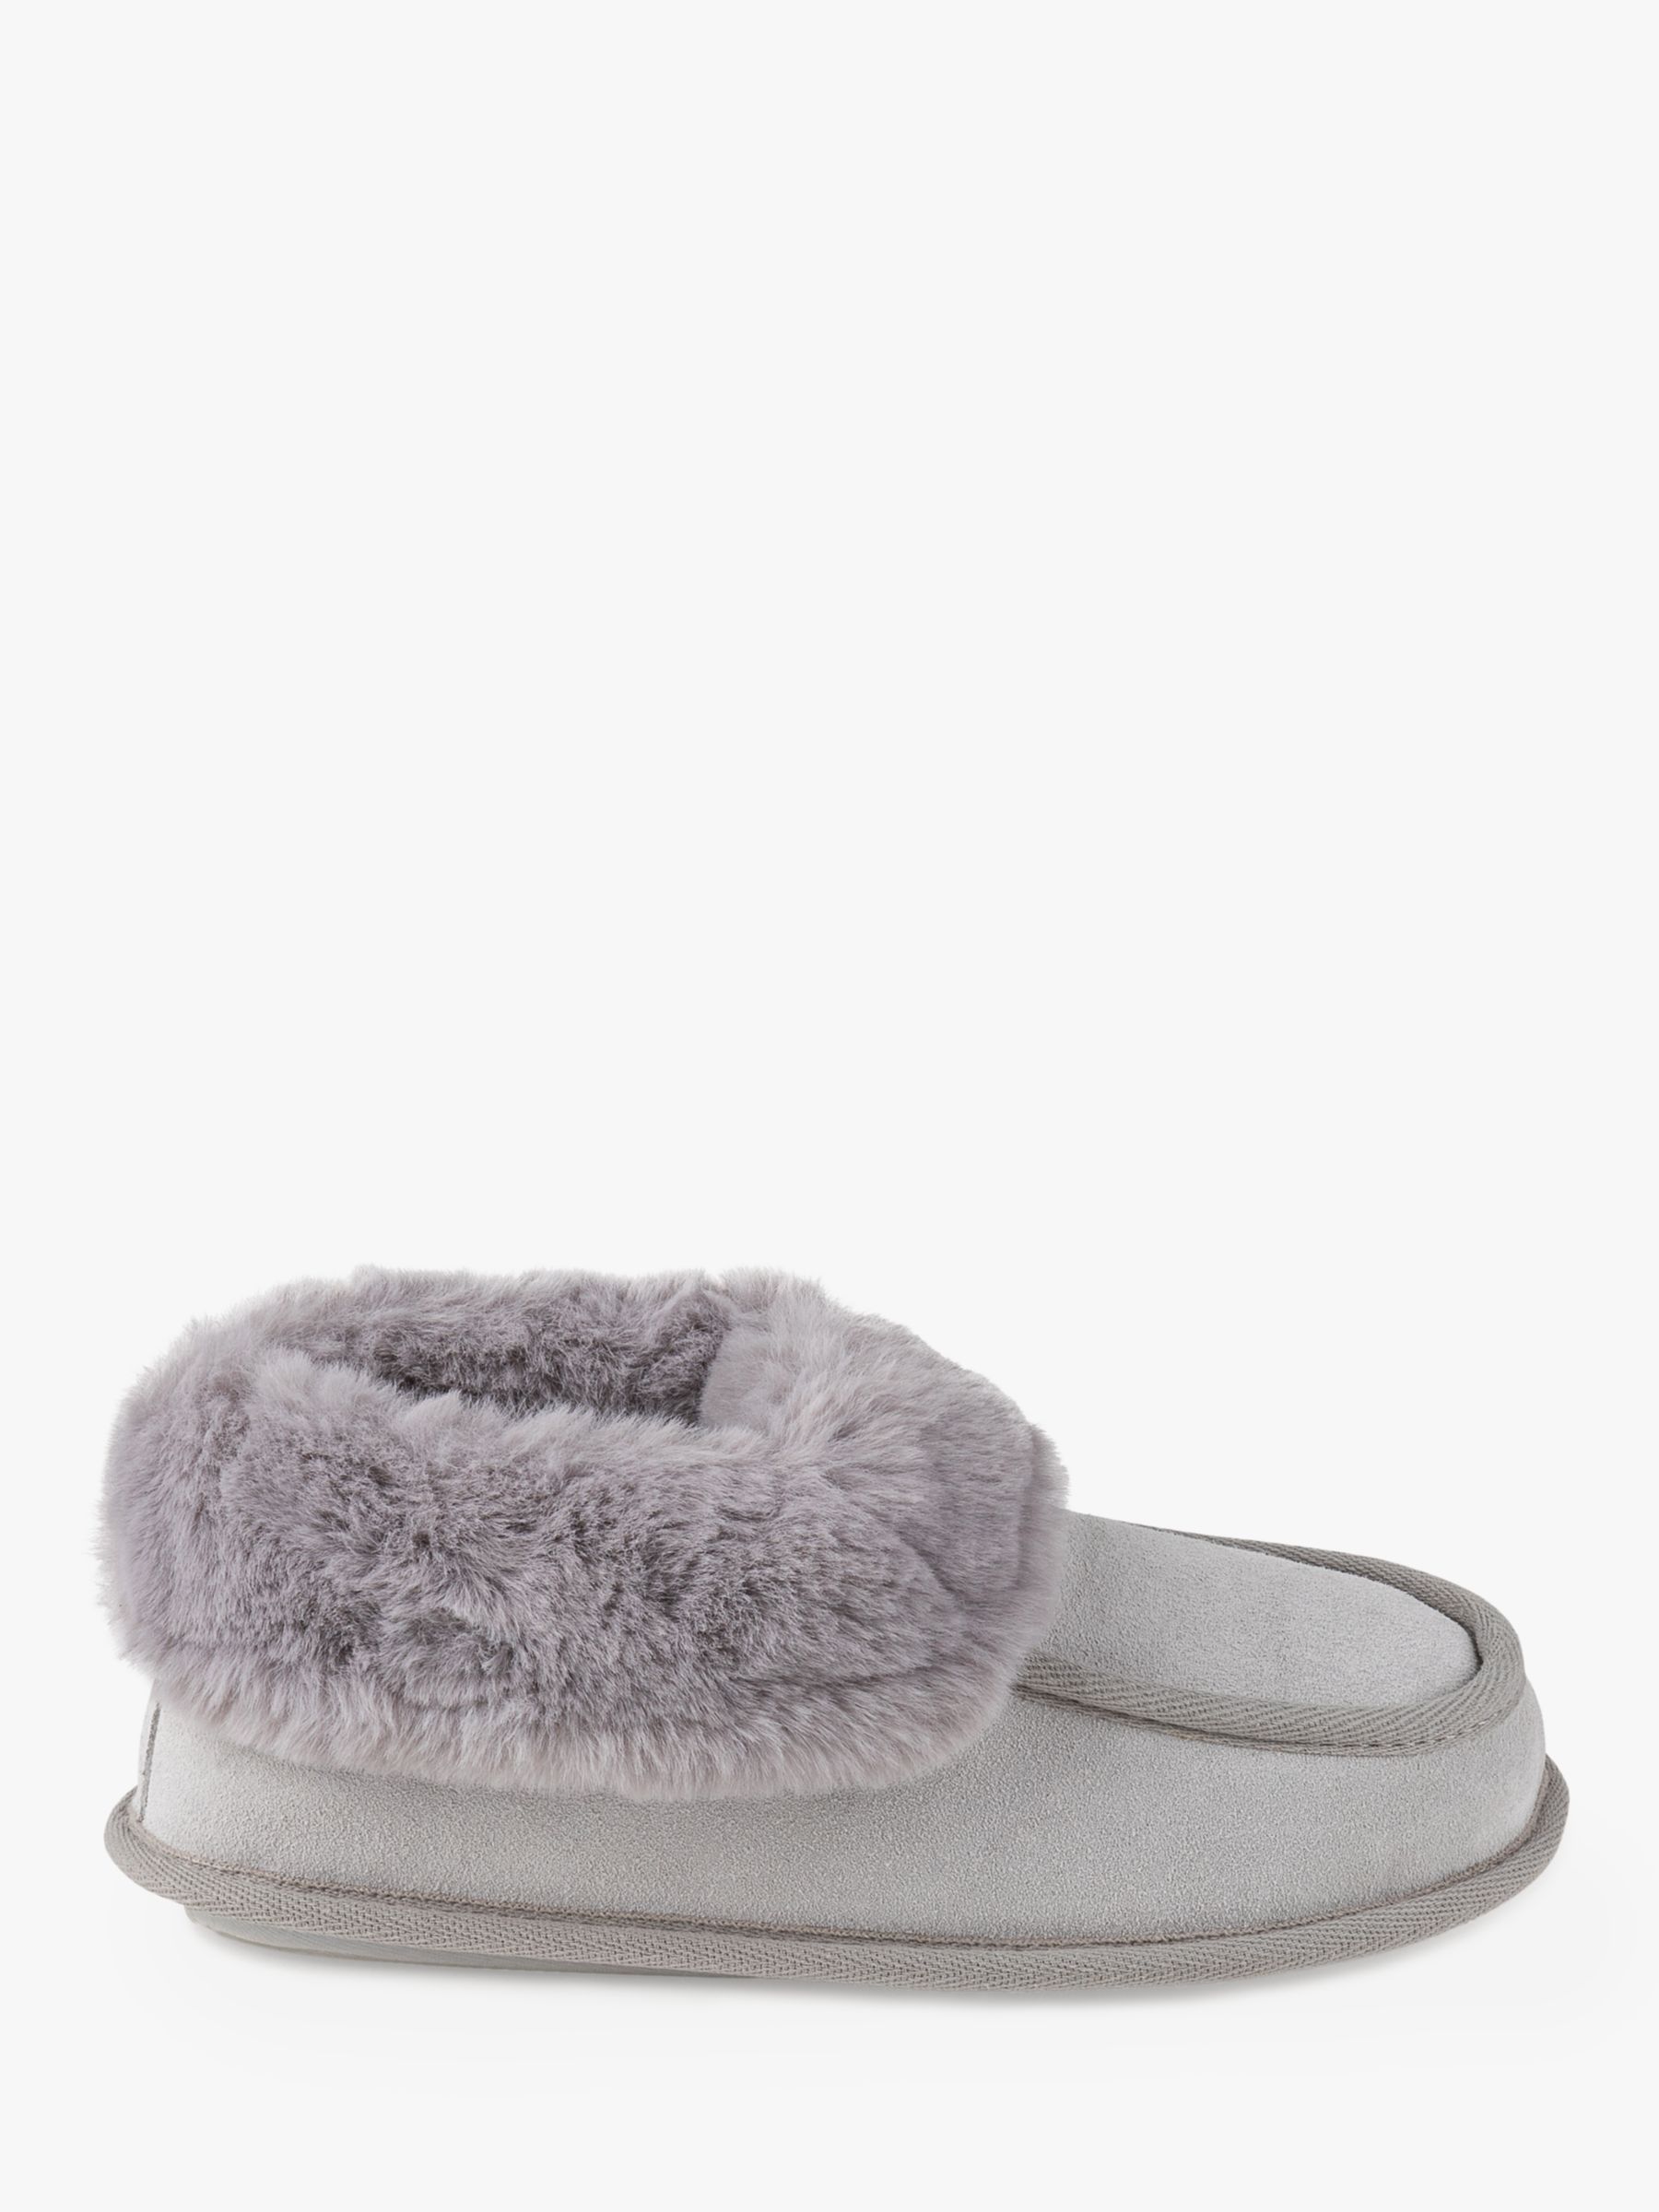 totes Real Suede Moccasin Bootie Slippers, Grey at John Lewis & Partners